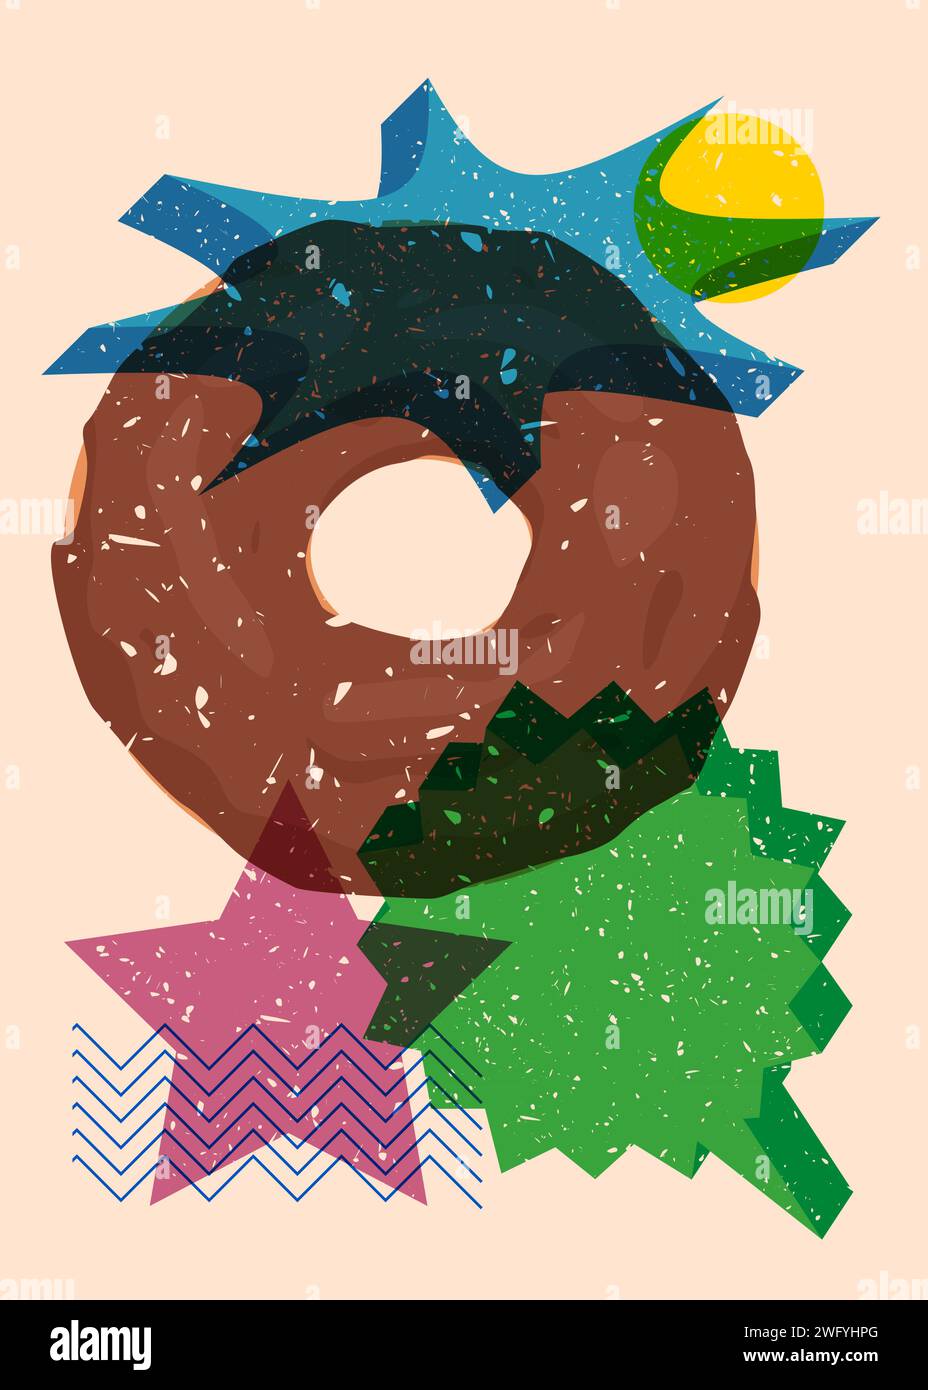 Risograph Doughnut, Sweet Food with speech bubble with geometric shapes. Dessert in trendy riso graph print texture style design with geometry element Stock Vector